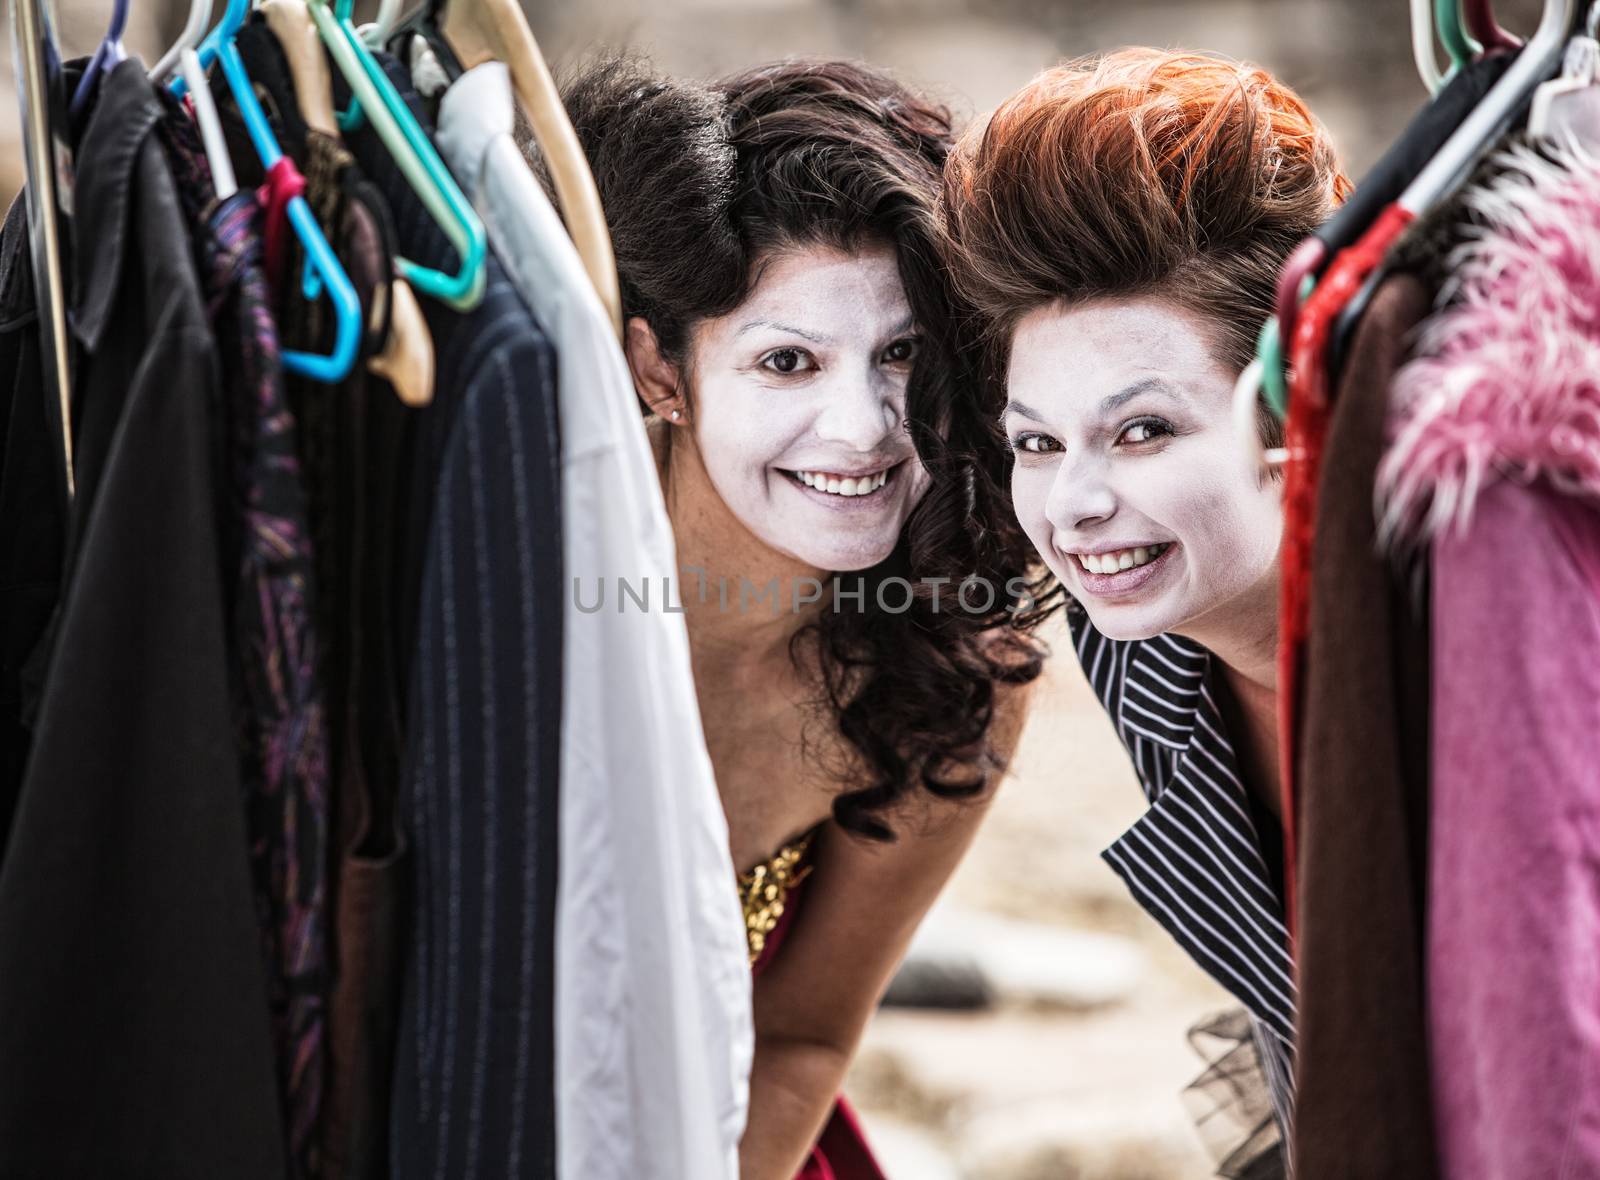 Pair of young cirque clowns peeking from clothing rack